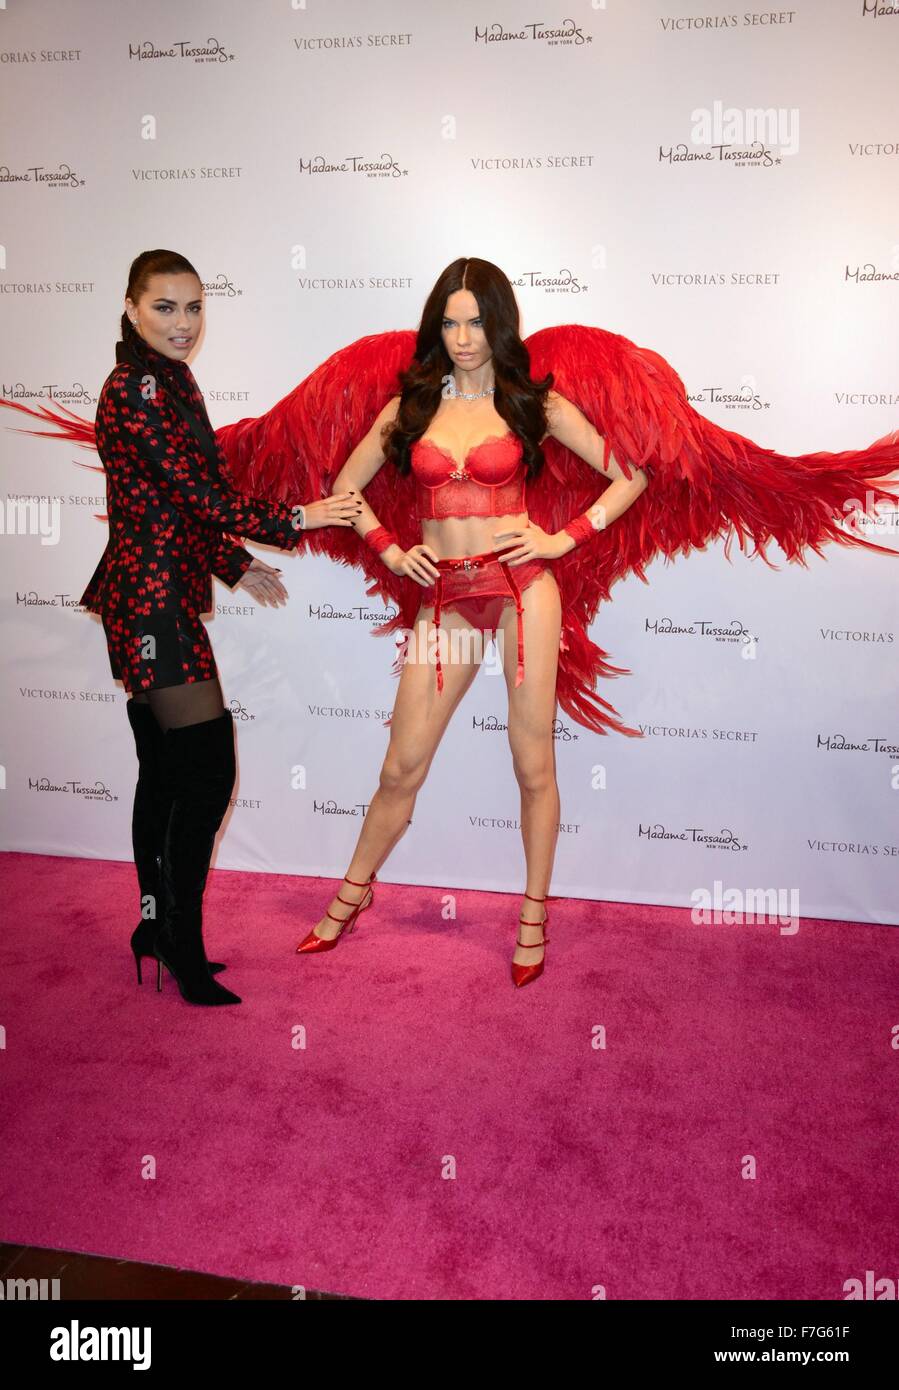 New York, NY, USA. 30th Nov, 2015. Adriana Lima at a public appearance for Madame Tussauds Unveils Wax Figure of Adriana Lima, Victoria's Secret Herald Square, New York, NY November 30, 2015. © Derek Storm/Everett Collection/Alamy Live News Stock Photo